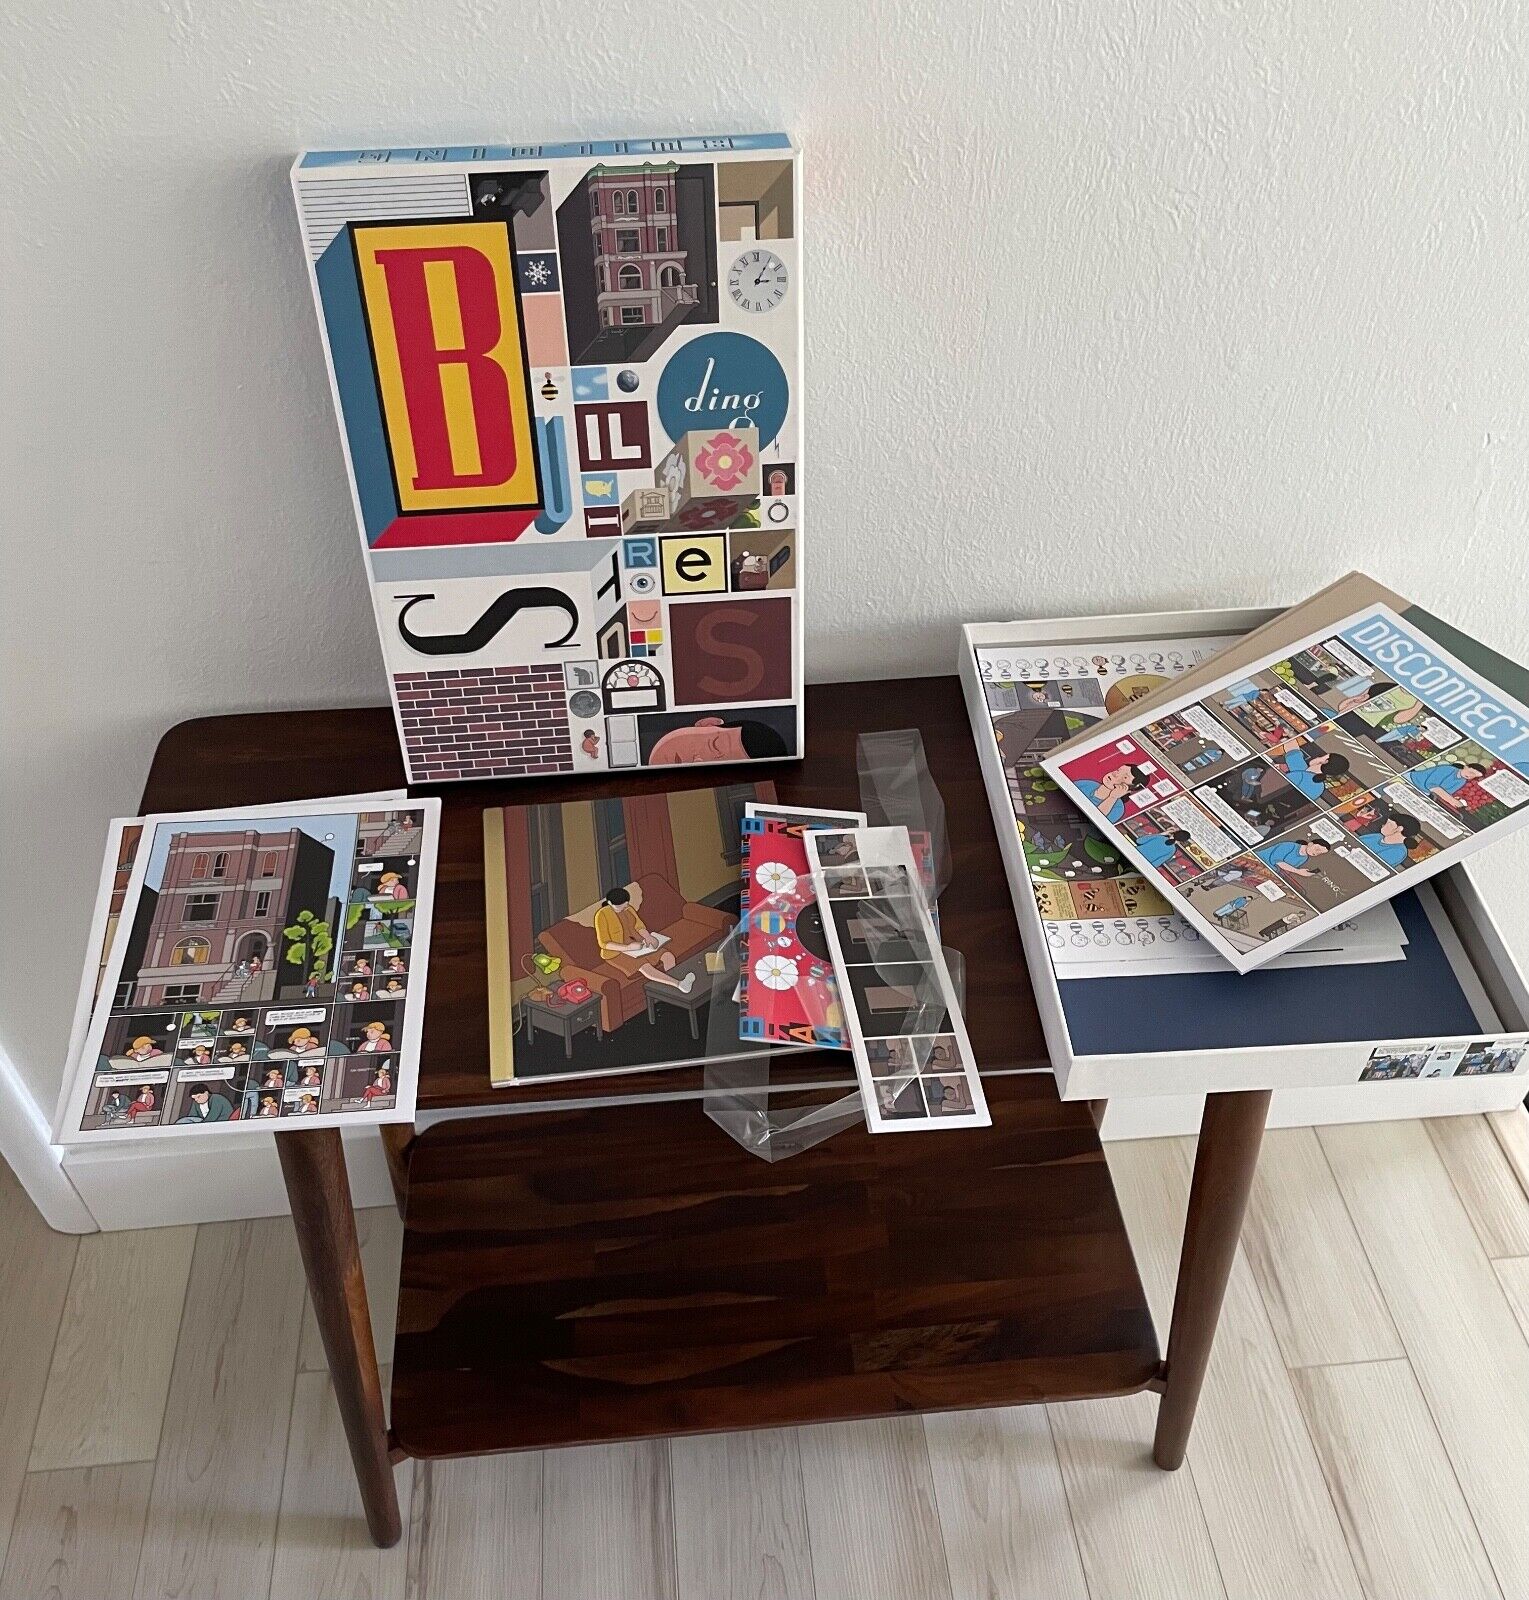 Building Stories by Chris Ware- (opened box - first edition, 2012)